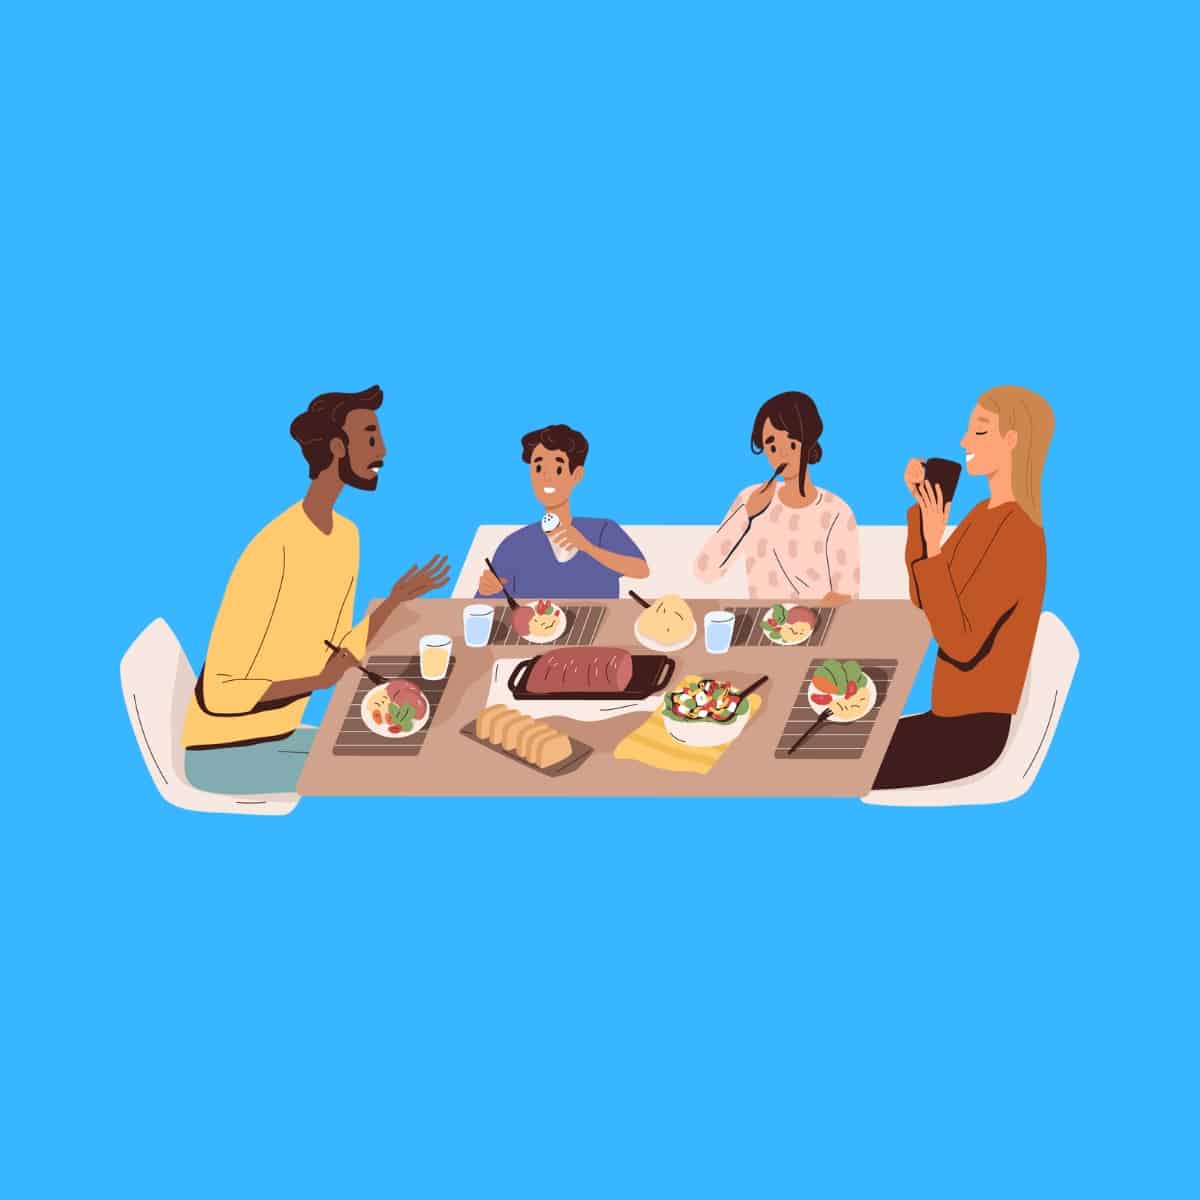 Cartoon graphic of a group of 4 adults eating dinner togther on a blue background.